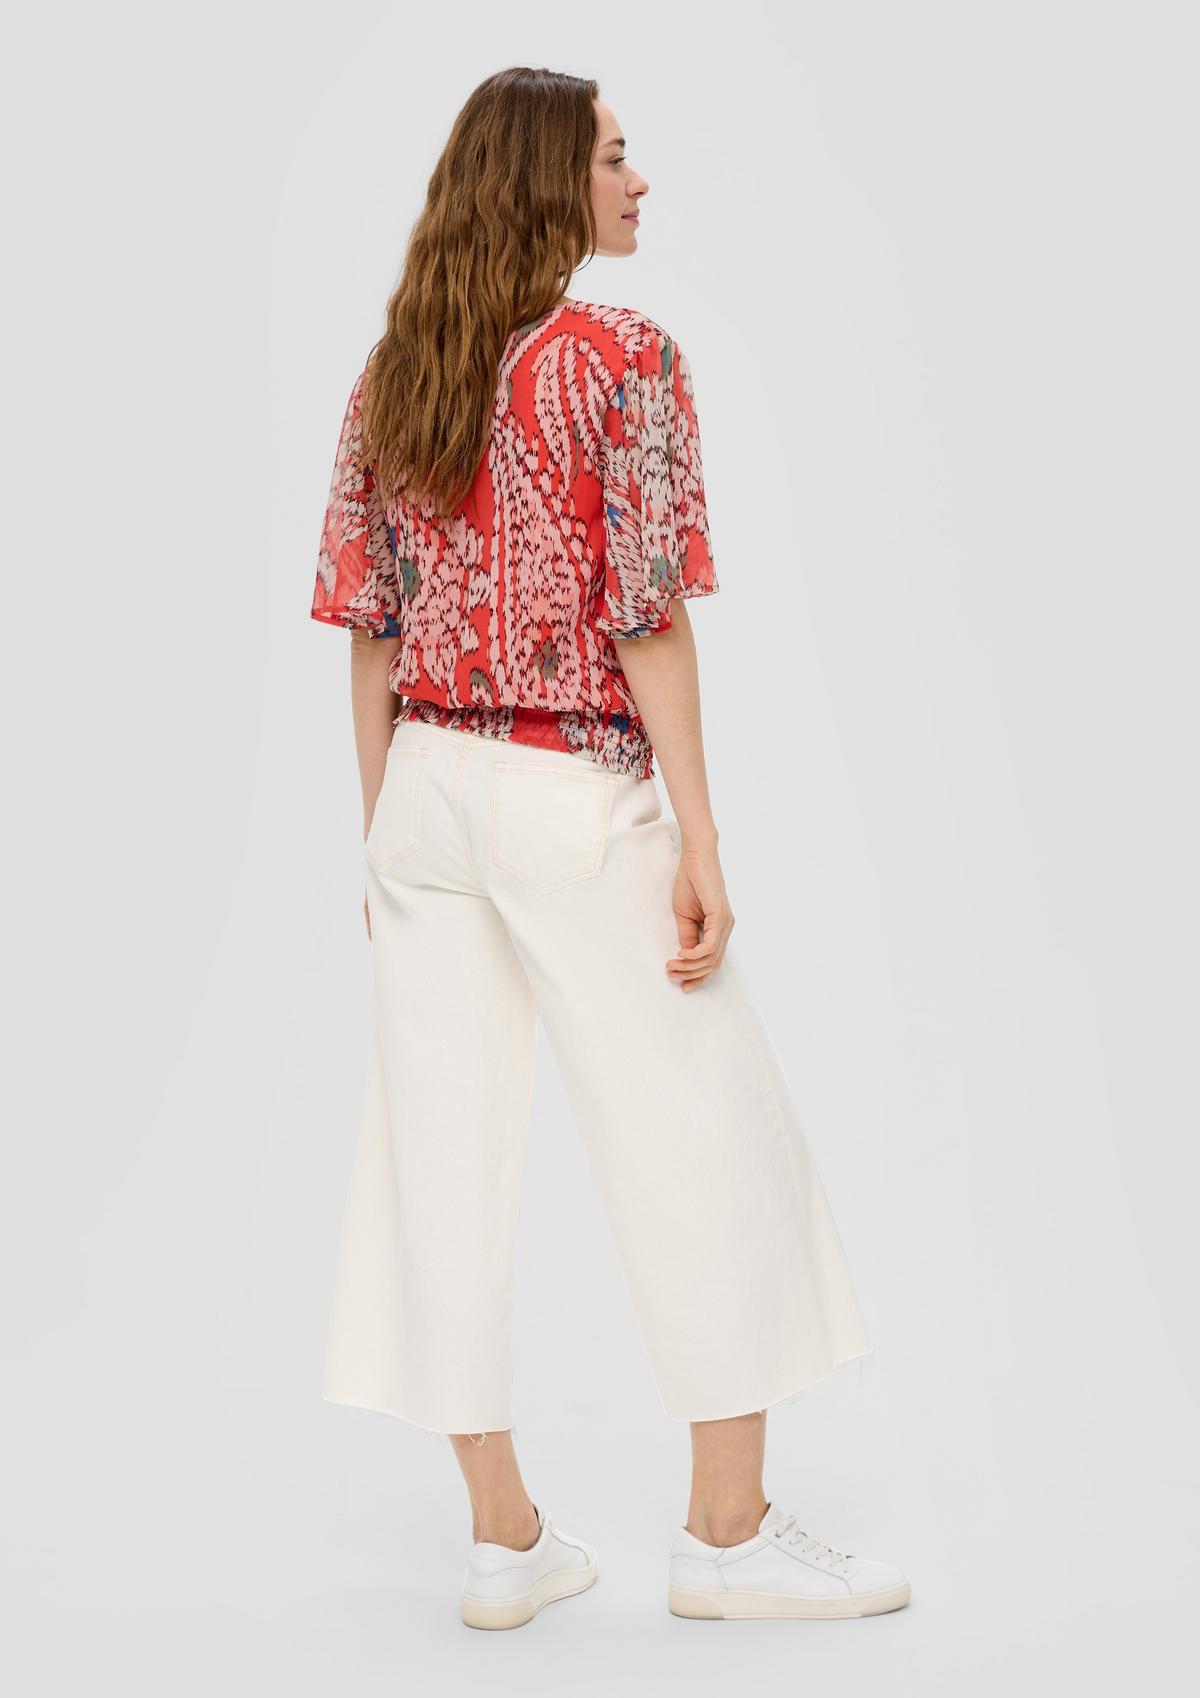 s.Oliver Chiffon blouse top